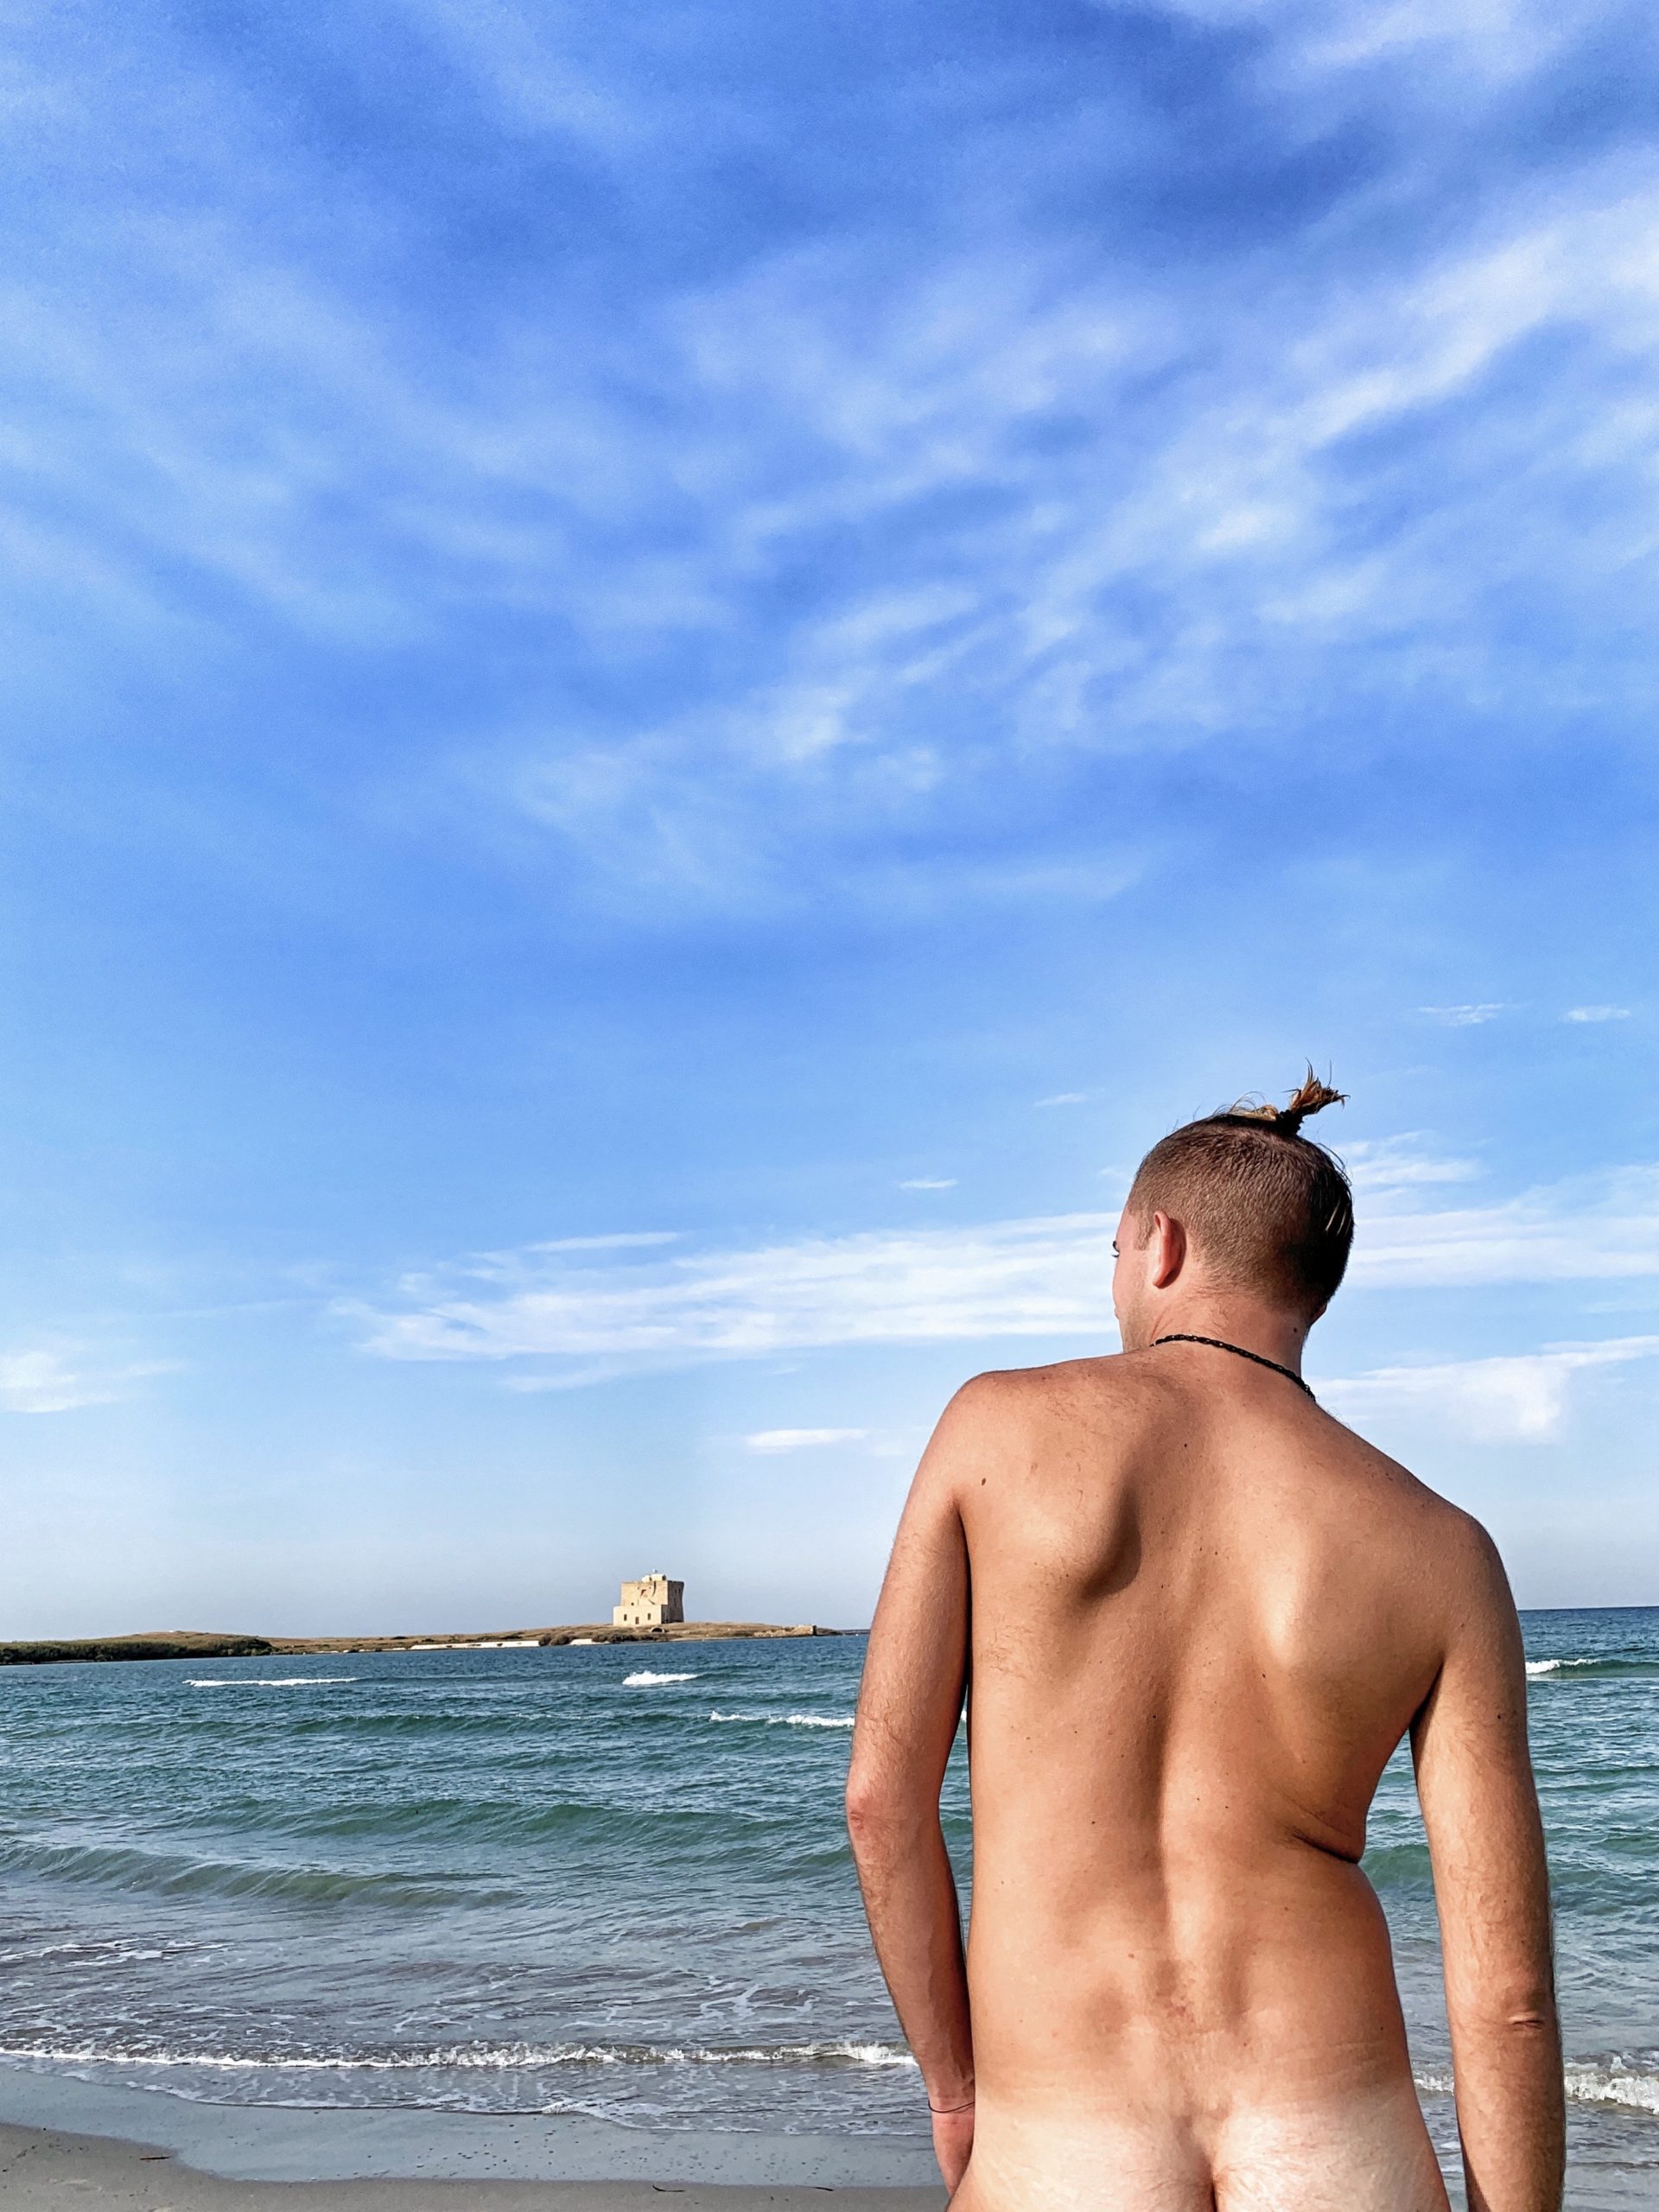 Male Nude Beach Pics sider shemale